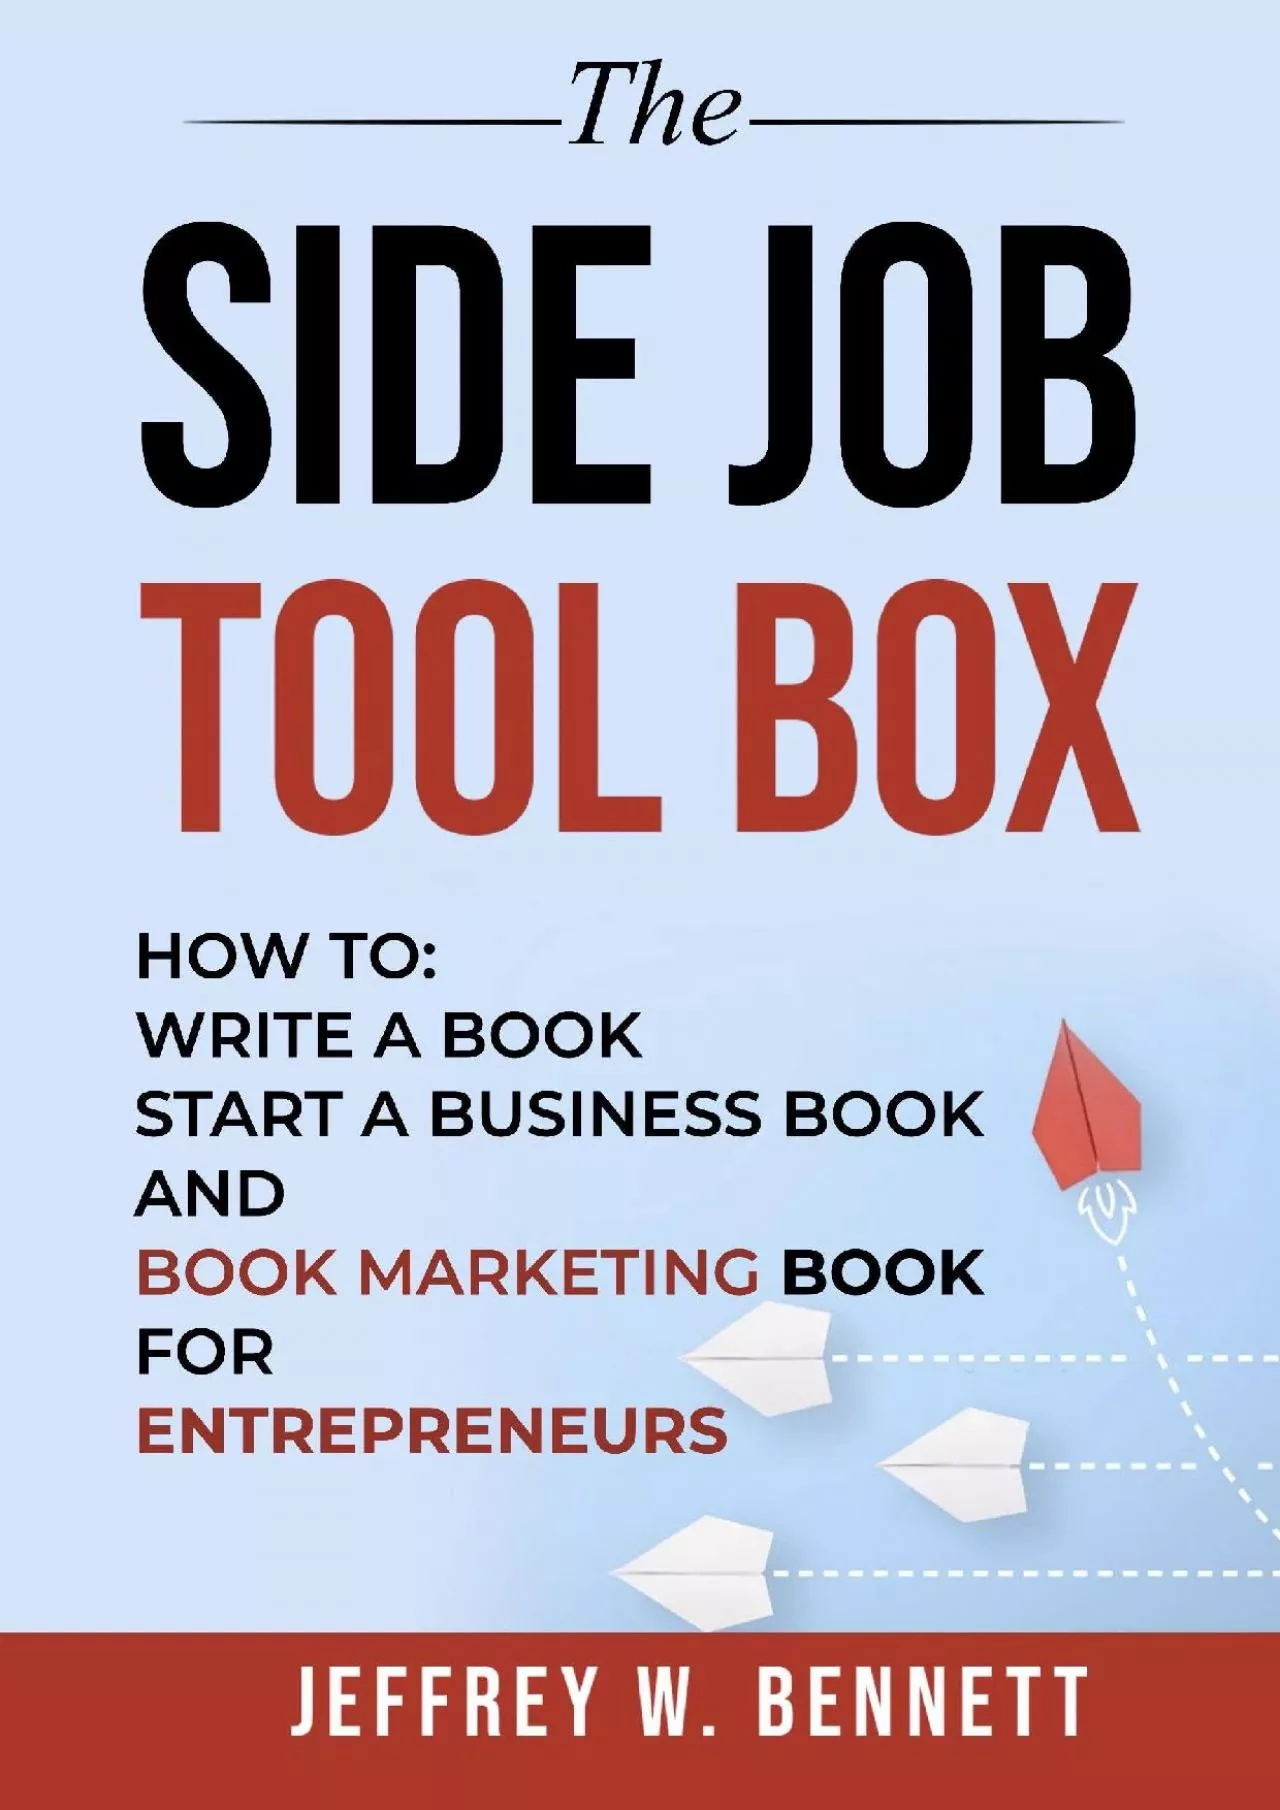 THE SIDE JOB TOOL BOX How to Write a Book, Start a Business Book and Book Marketing Book